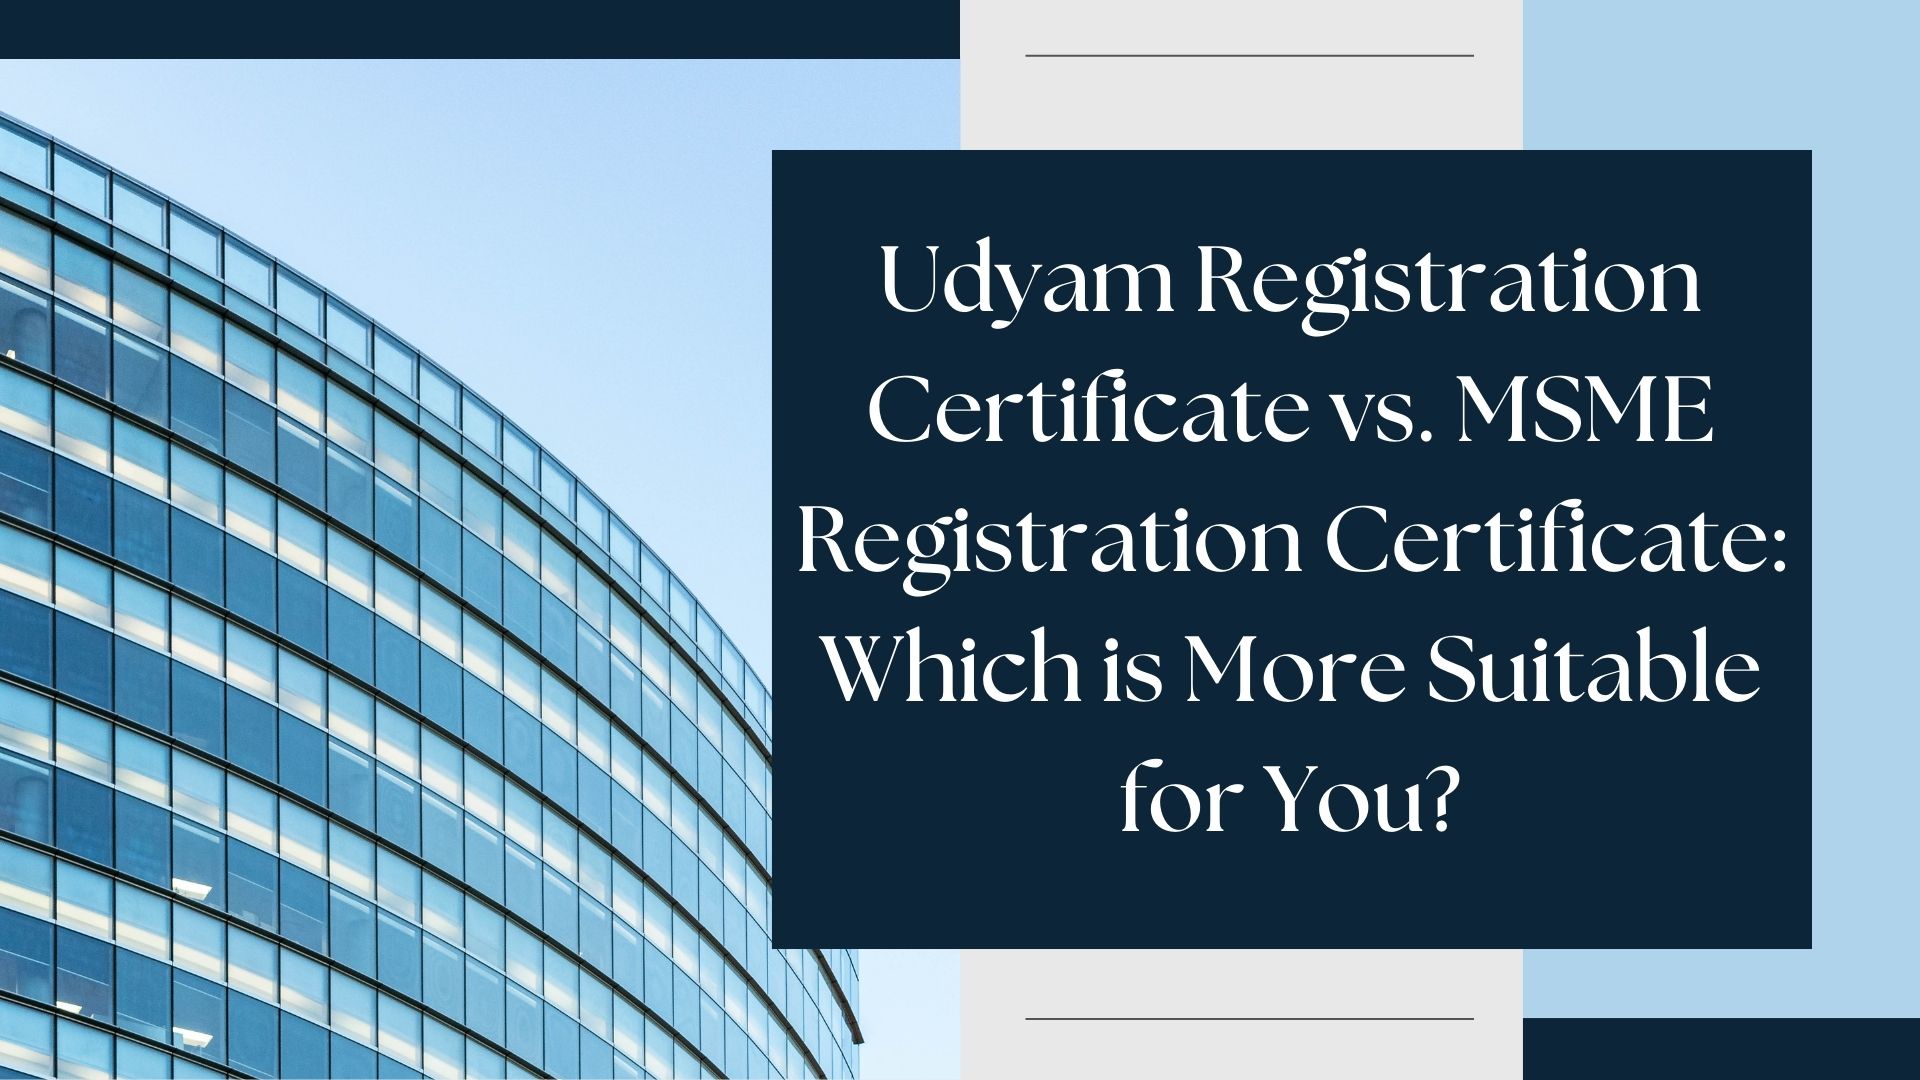 Udyam Registration Certificate vs. MSME Registration Certificate: Which is More Suitable for You?